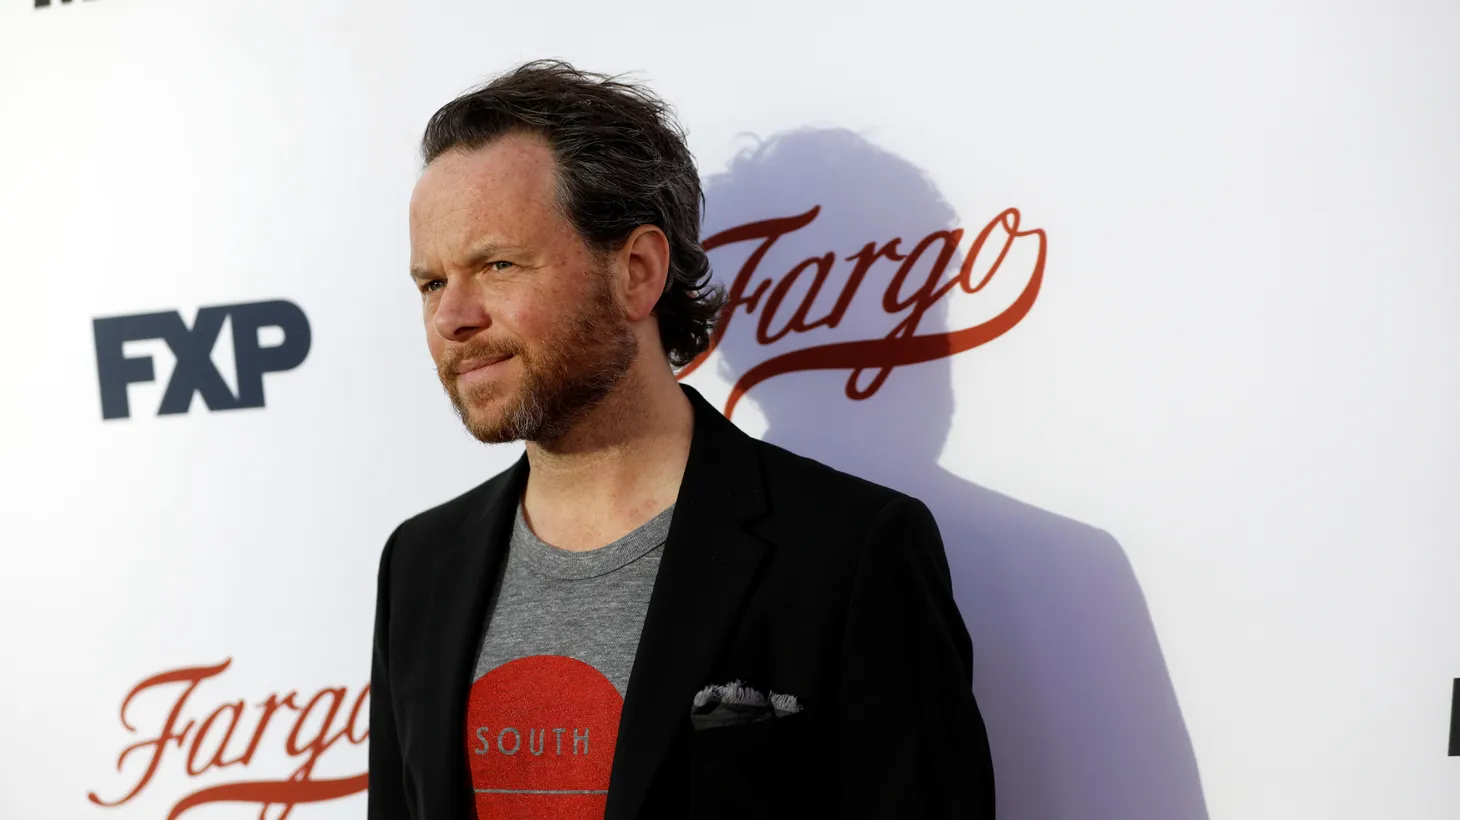 Writer and producer Noah Hawley arrives at the Fargo Season Three For Your Consideration event at the Television Academy's Saban Media Center in North Hollywood, California May 11, 2017.